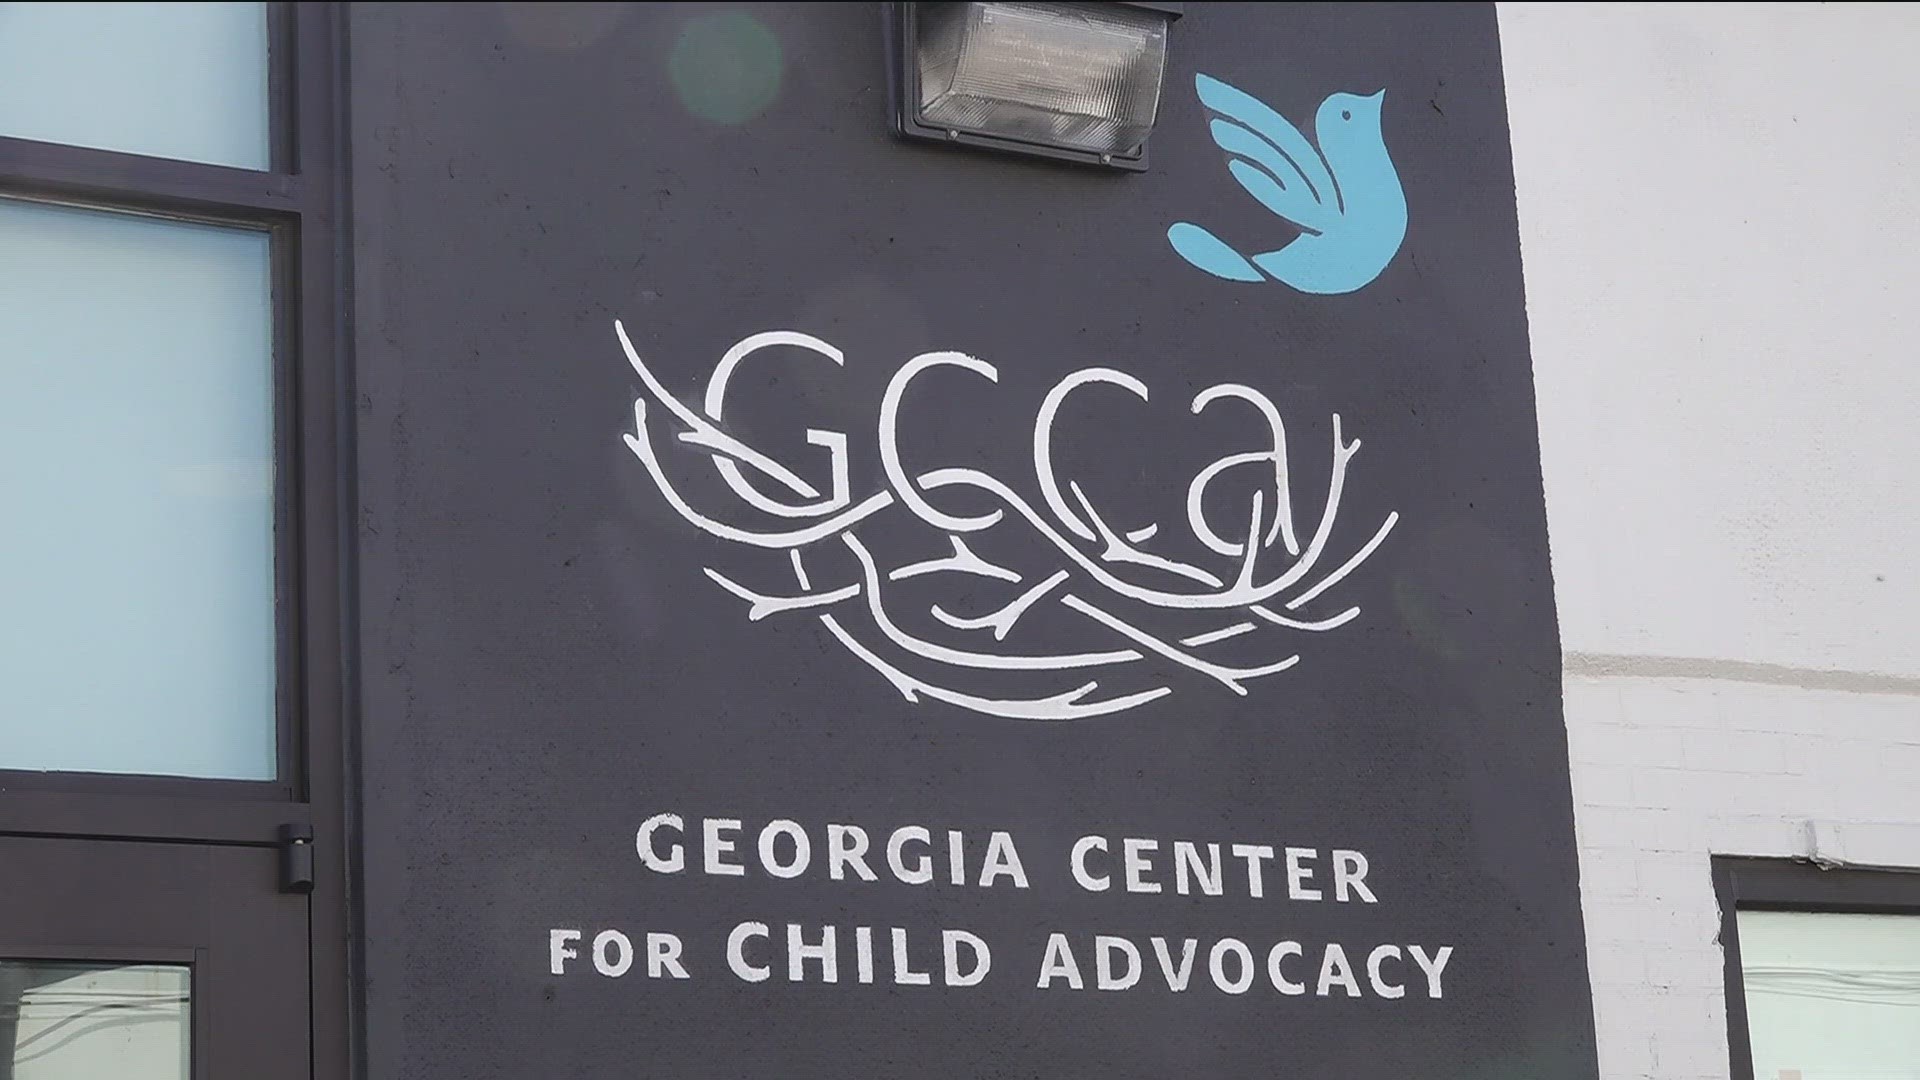 Leaders with the Georgia Center for Child Advocacy are asking the community for help so they can help children who face physical or sexual abuse.